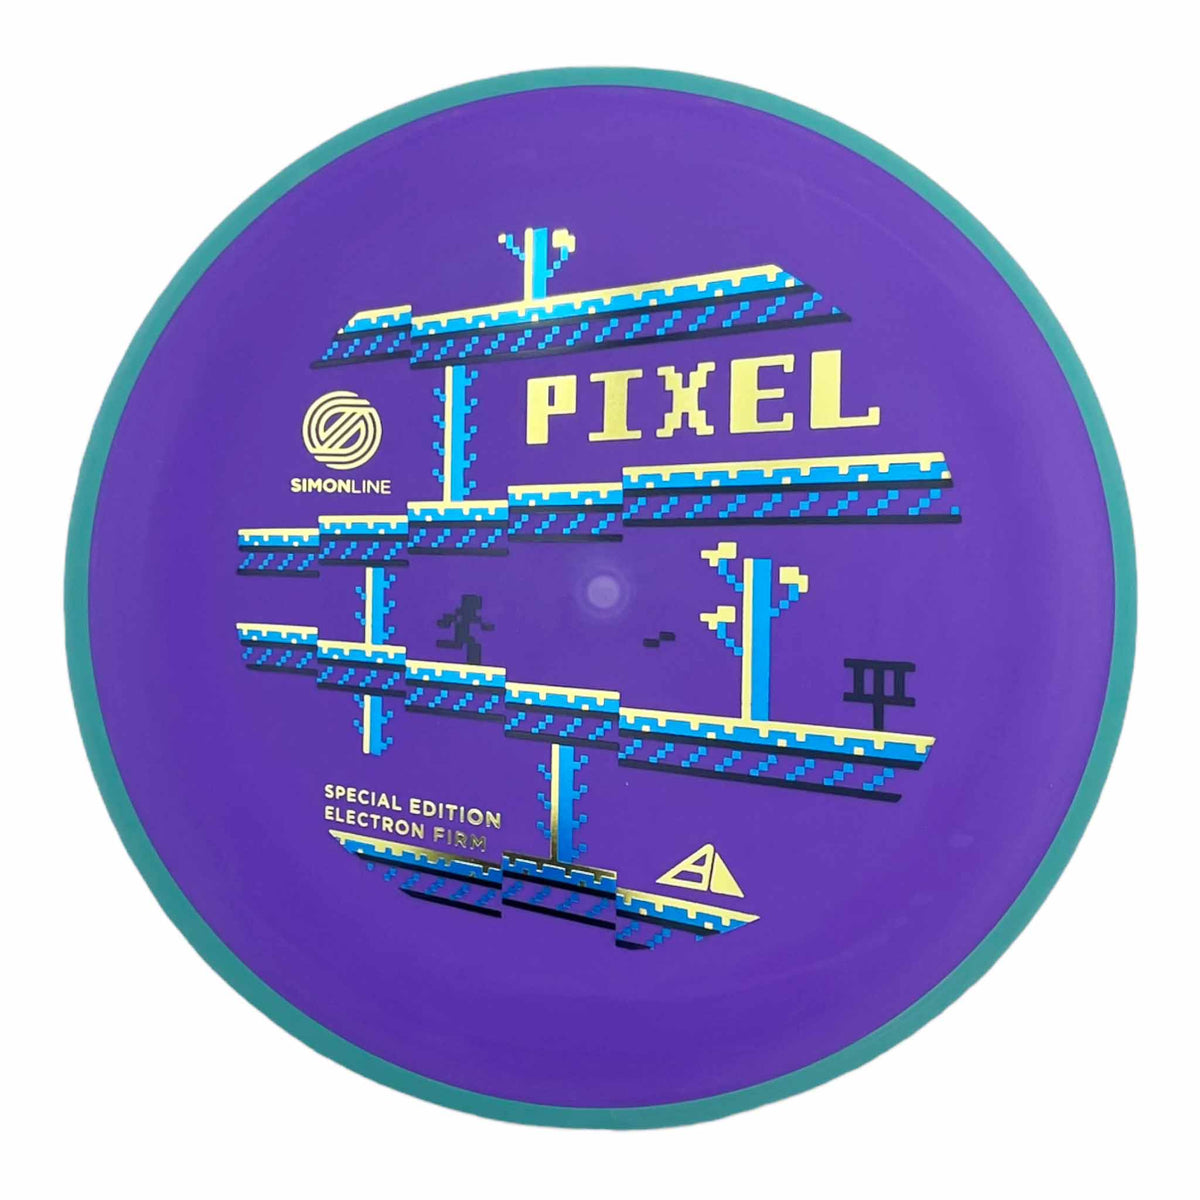 Axiom Discs Simon Line Electron Firm Pixel Special Edition putter and approach - Purple / Teal